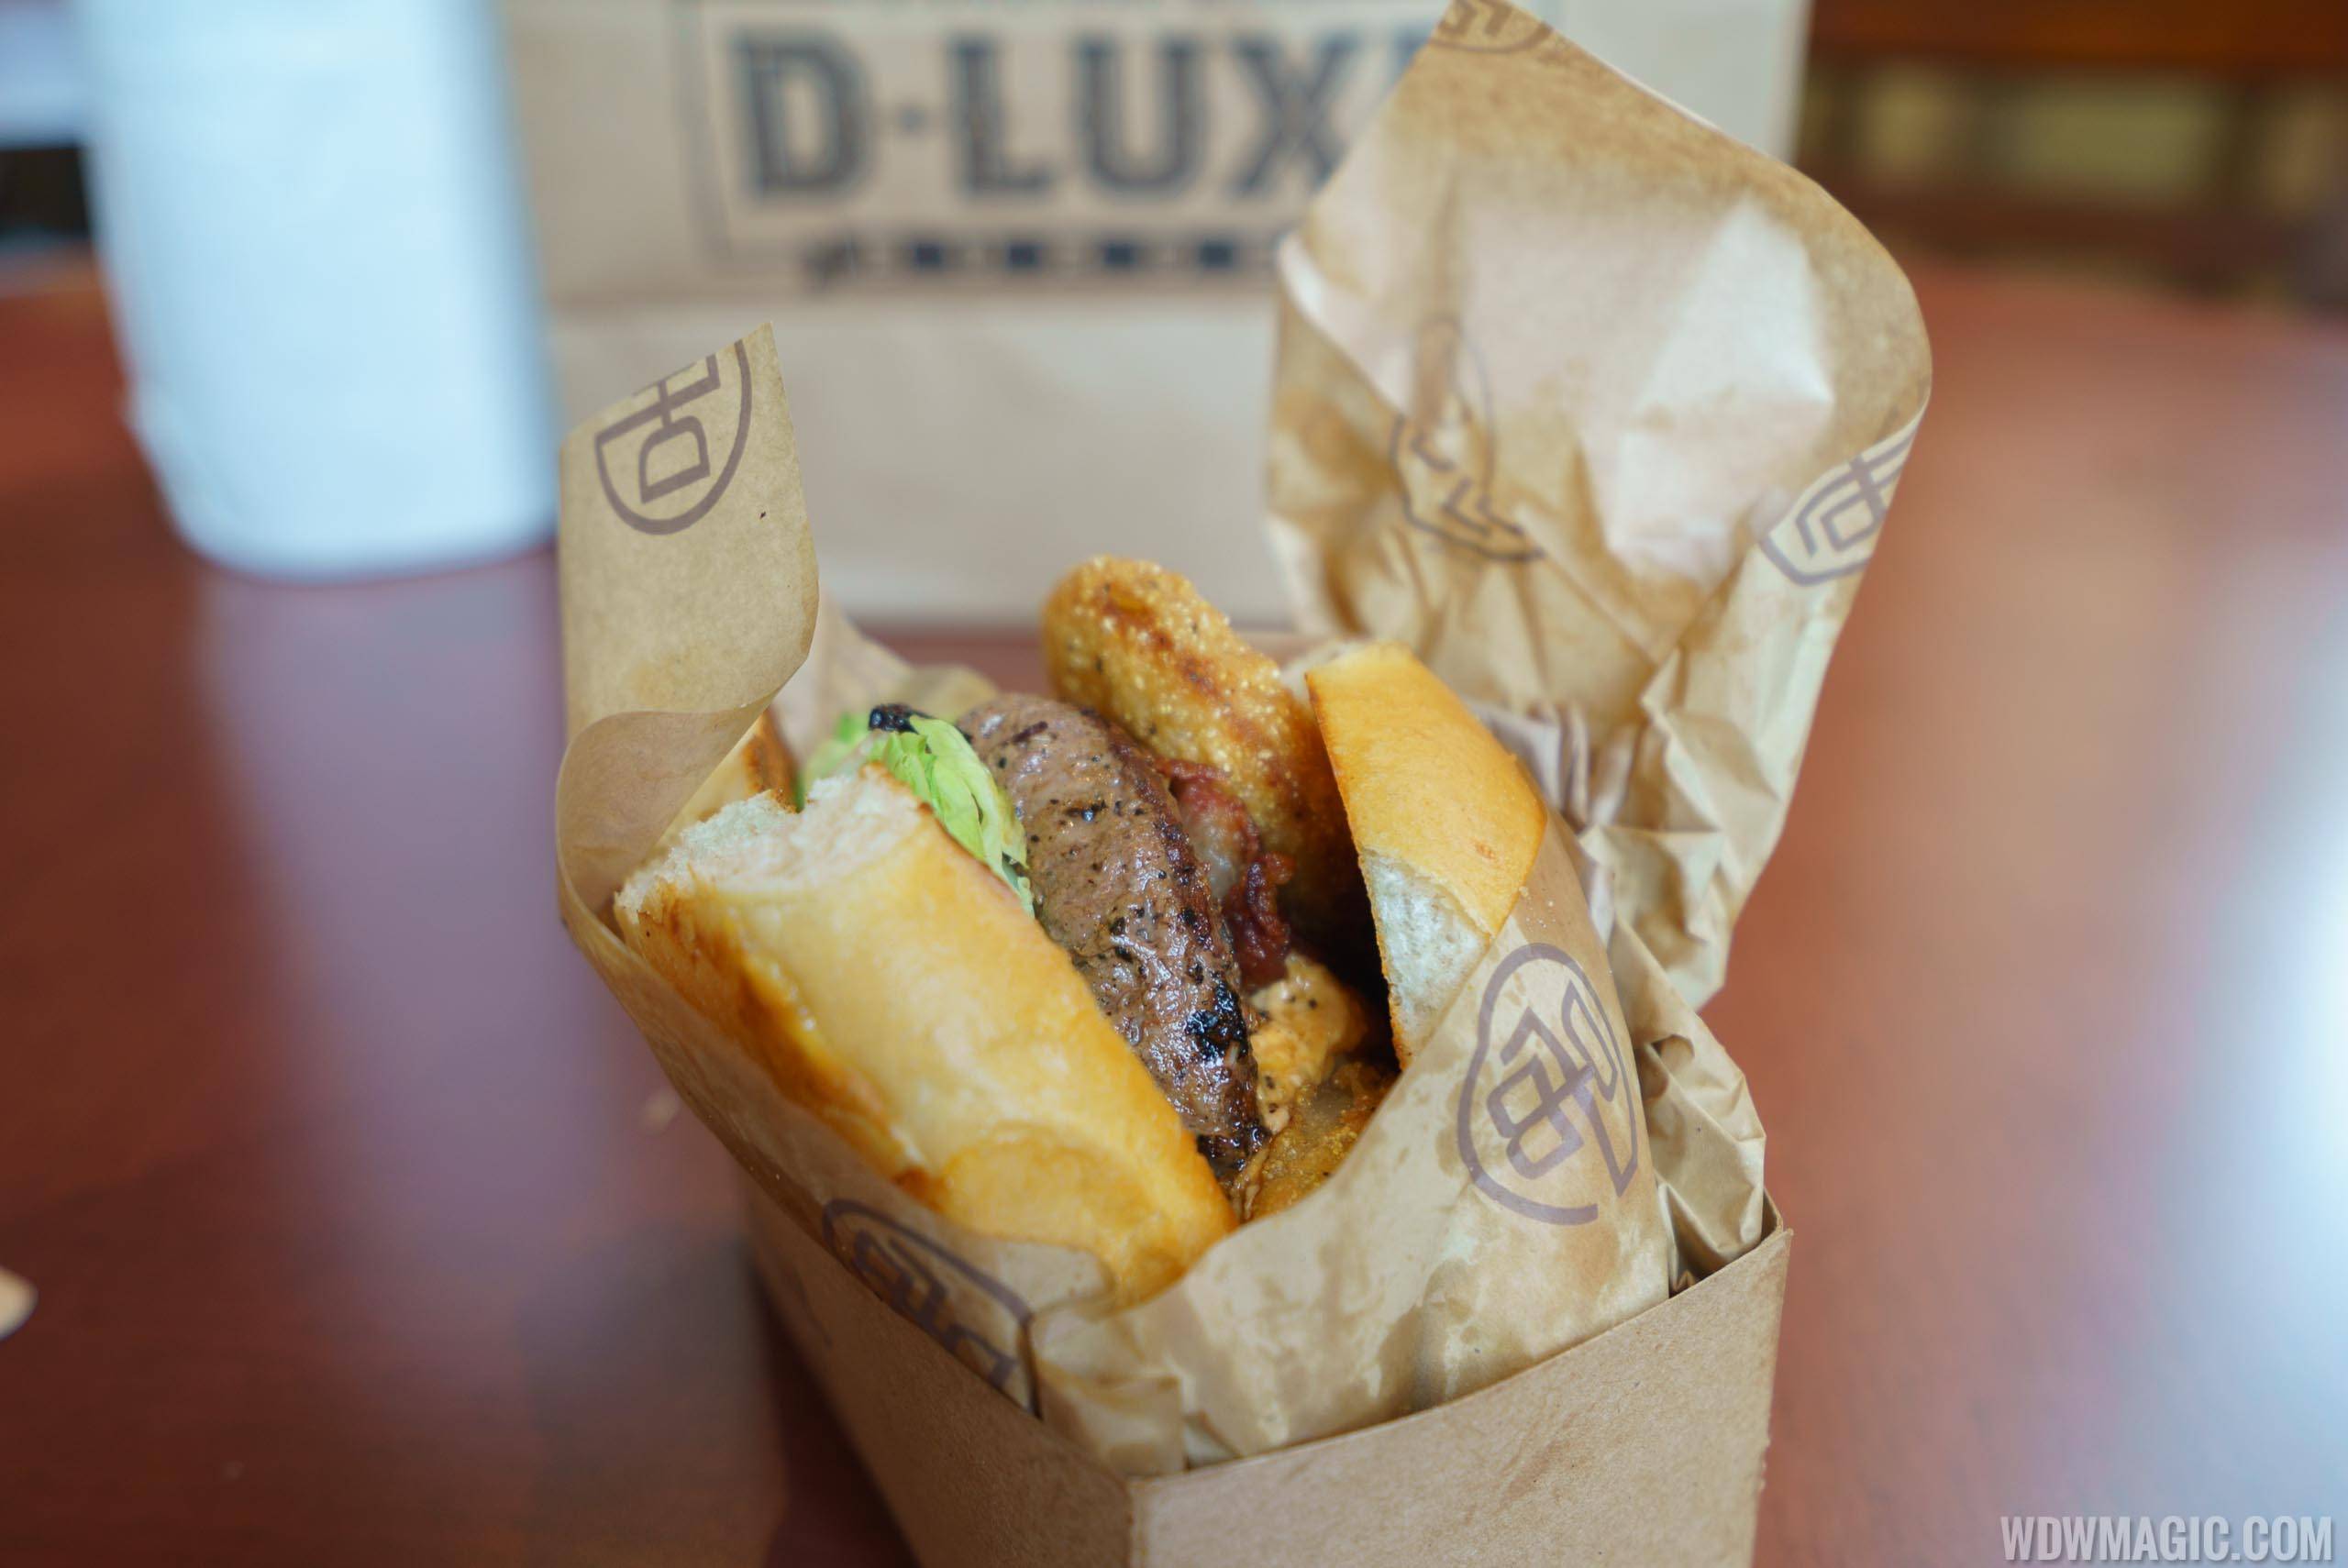 D-Luxe Burger overview